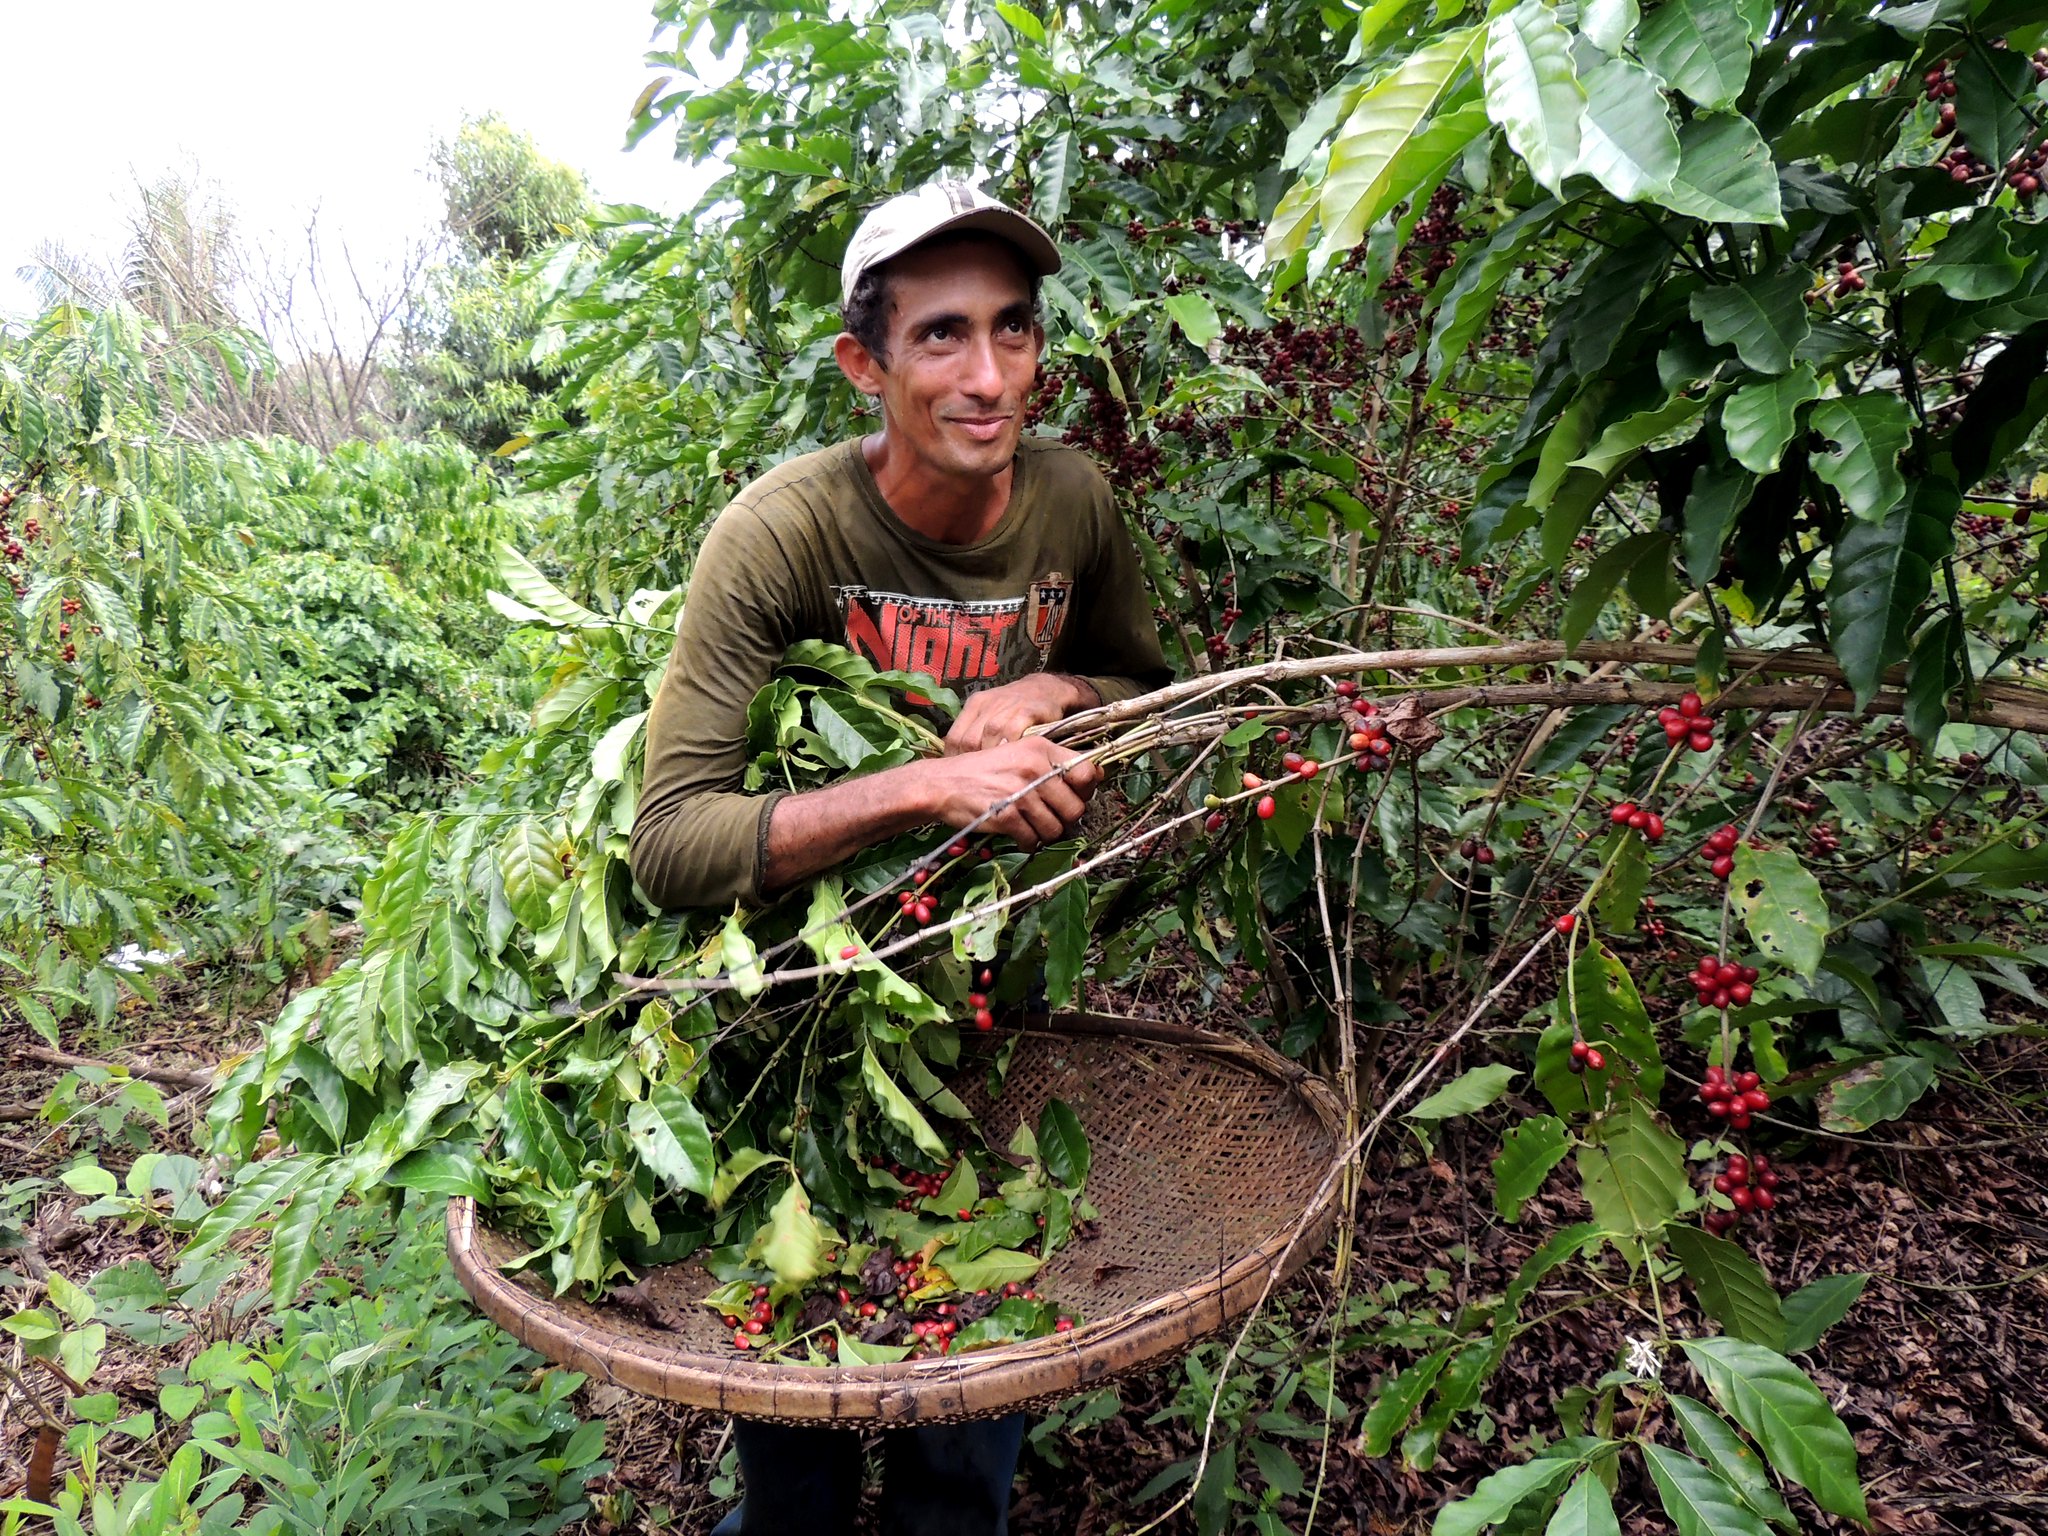 Nicaraguan coffee ripe but no one harvests climate change pressure motivates local workers to choose to emigrate